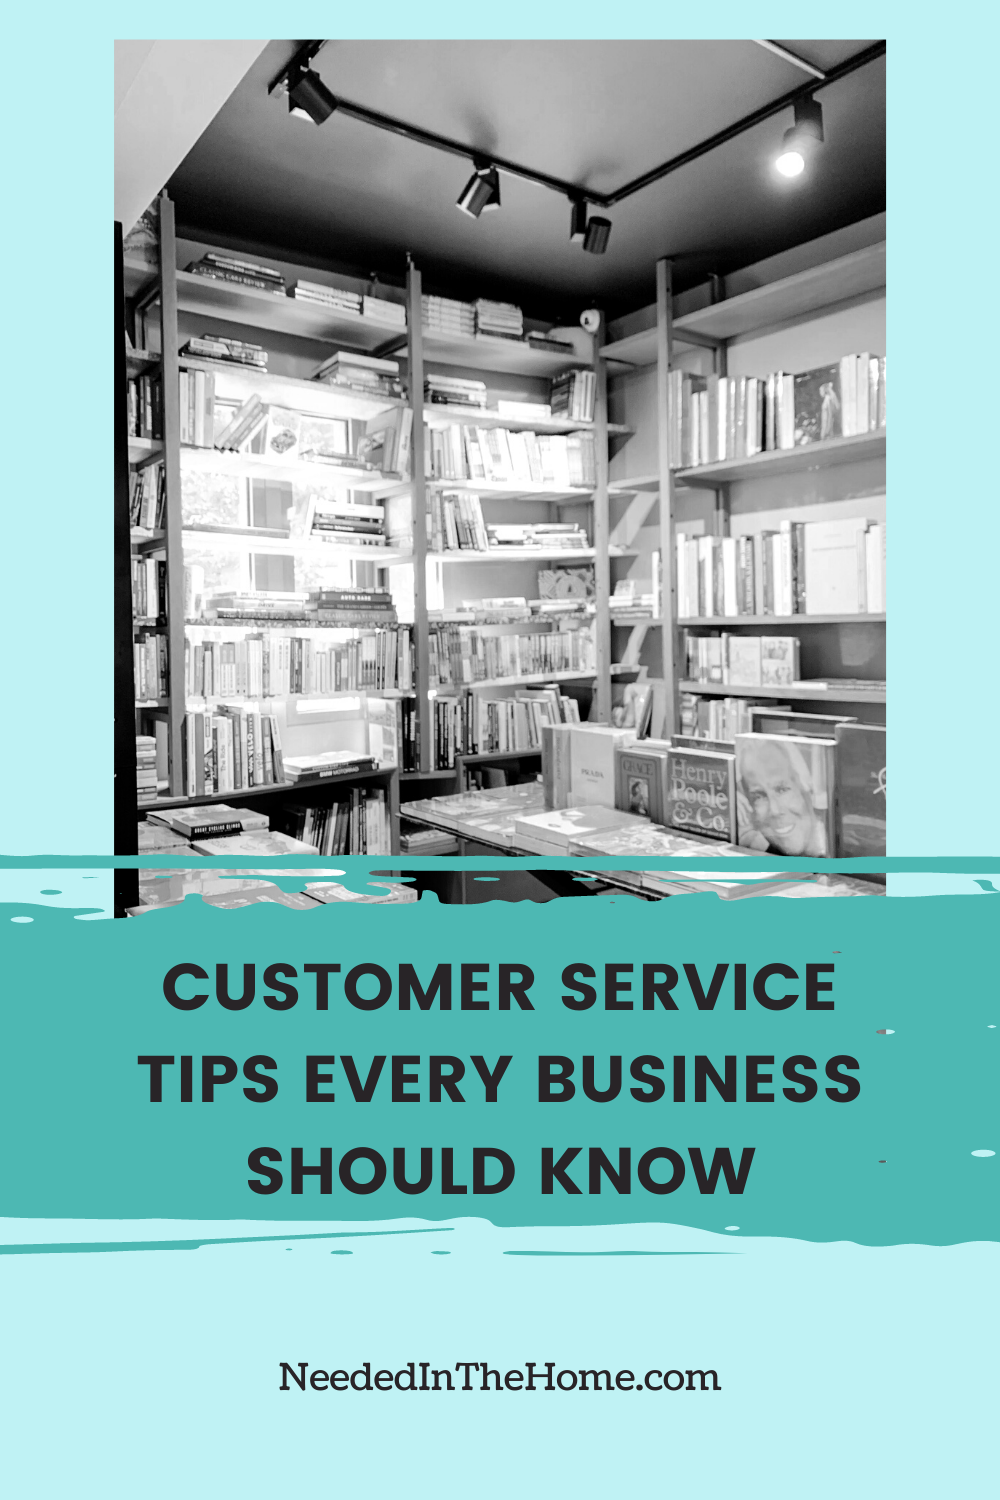 pinterest-pin-description customer service tips every business should know retail store shelves neededinthehome